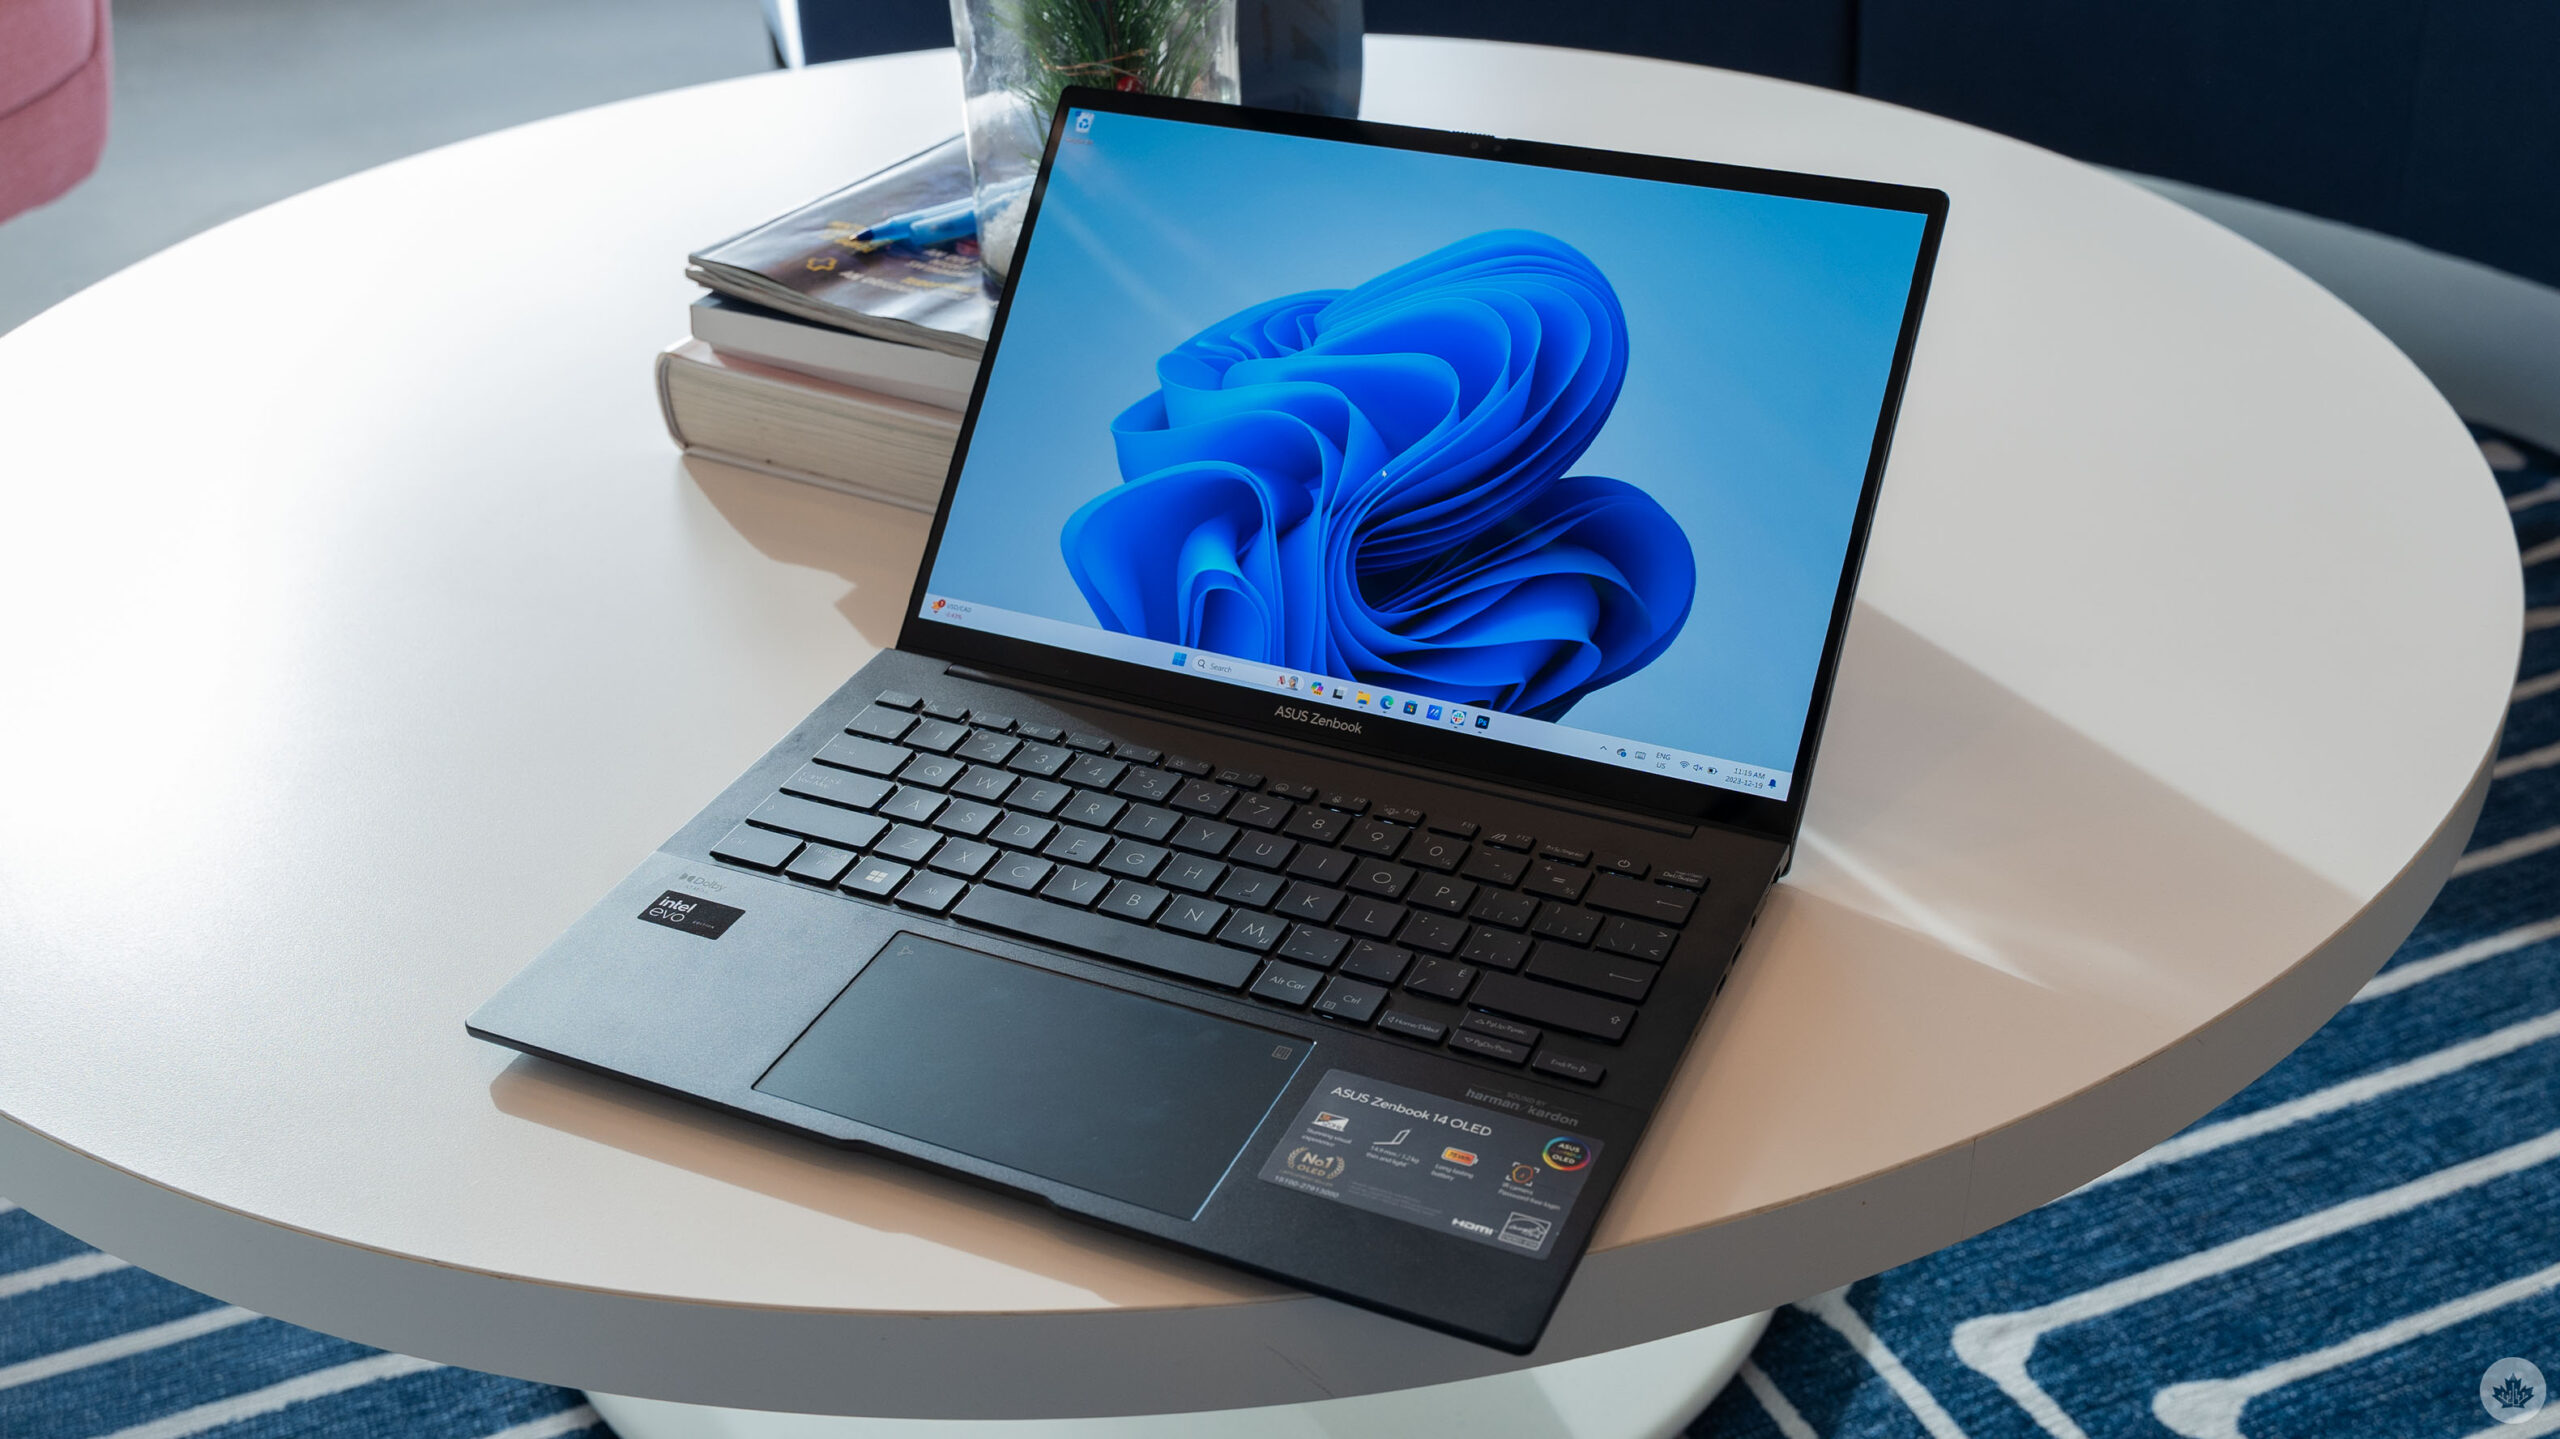 Asus Zenbook 14 OLED With Up to Intel Core Ultra 9 Processors Launched:  Price, Specifications